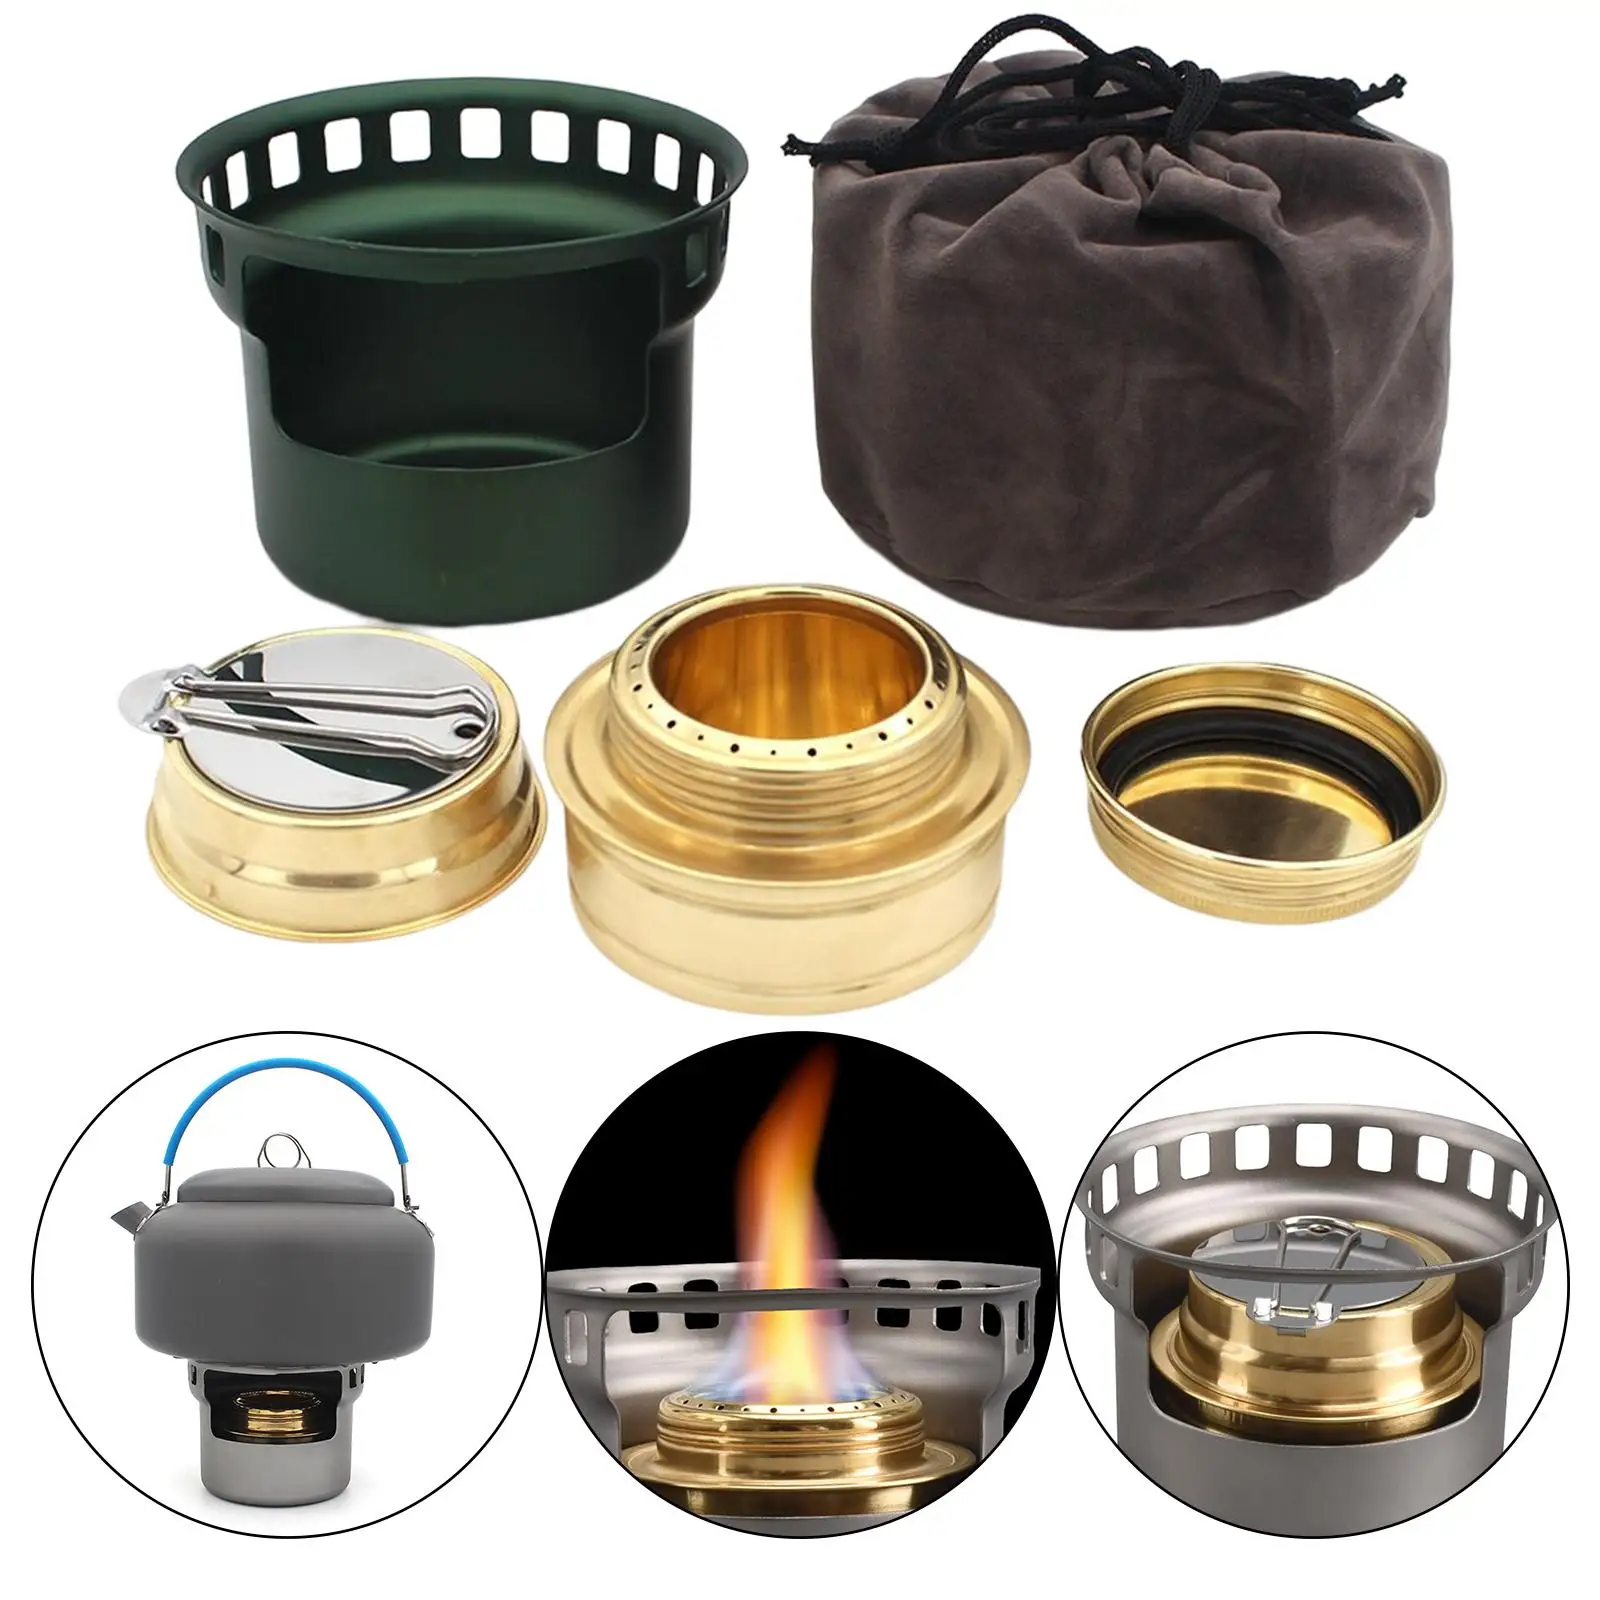 Spirit Stove Burner with Bag Lightweight   Stove for Travel Camping